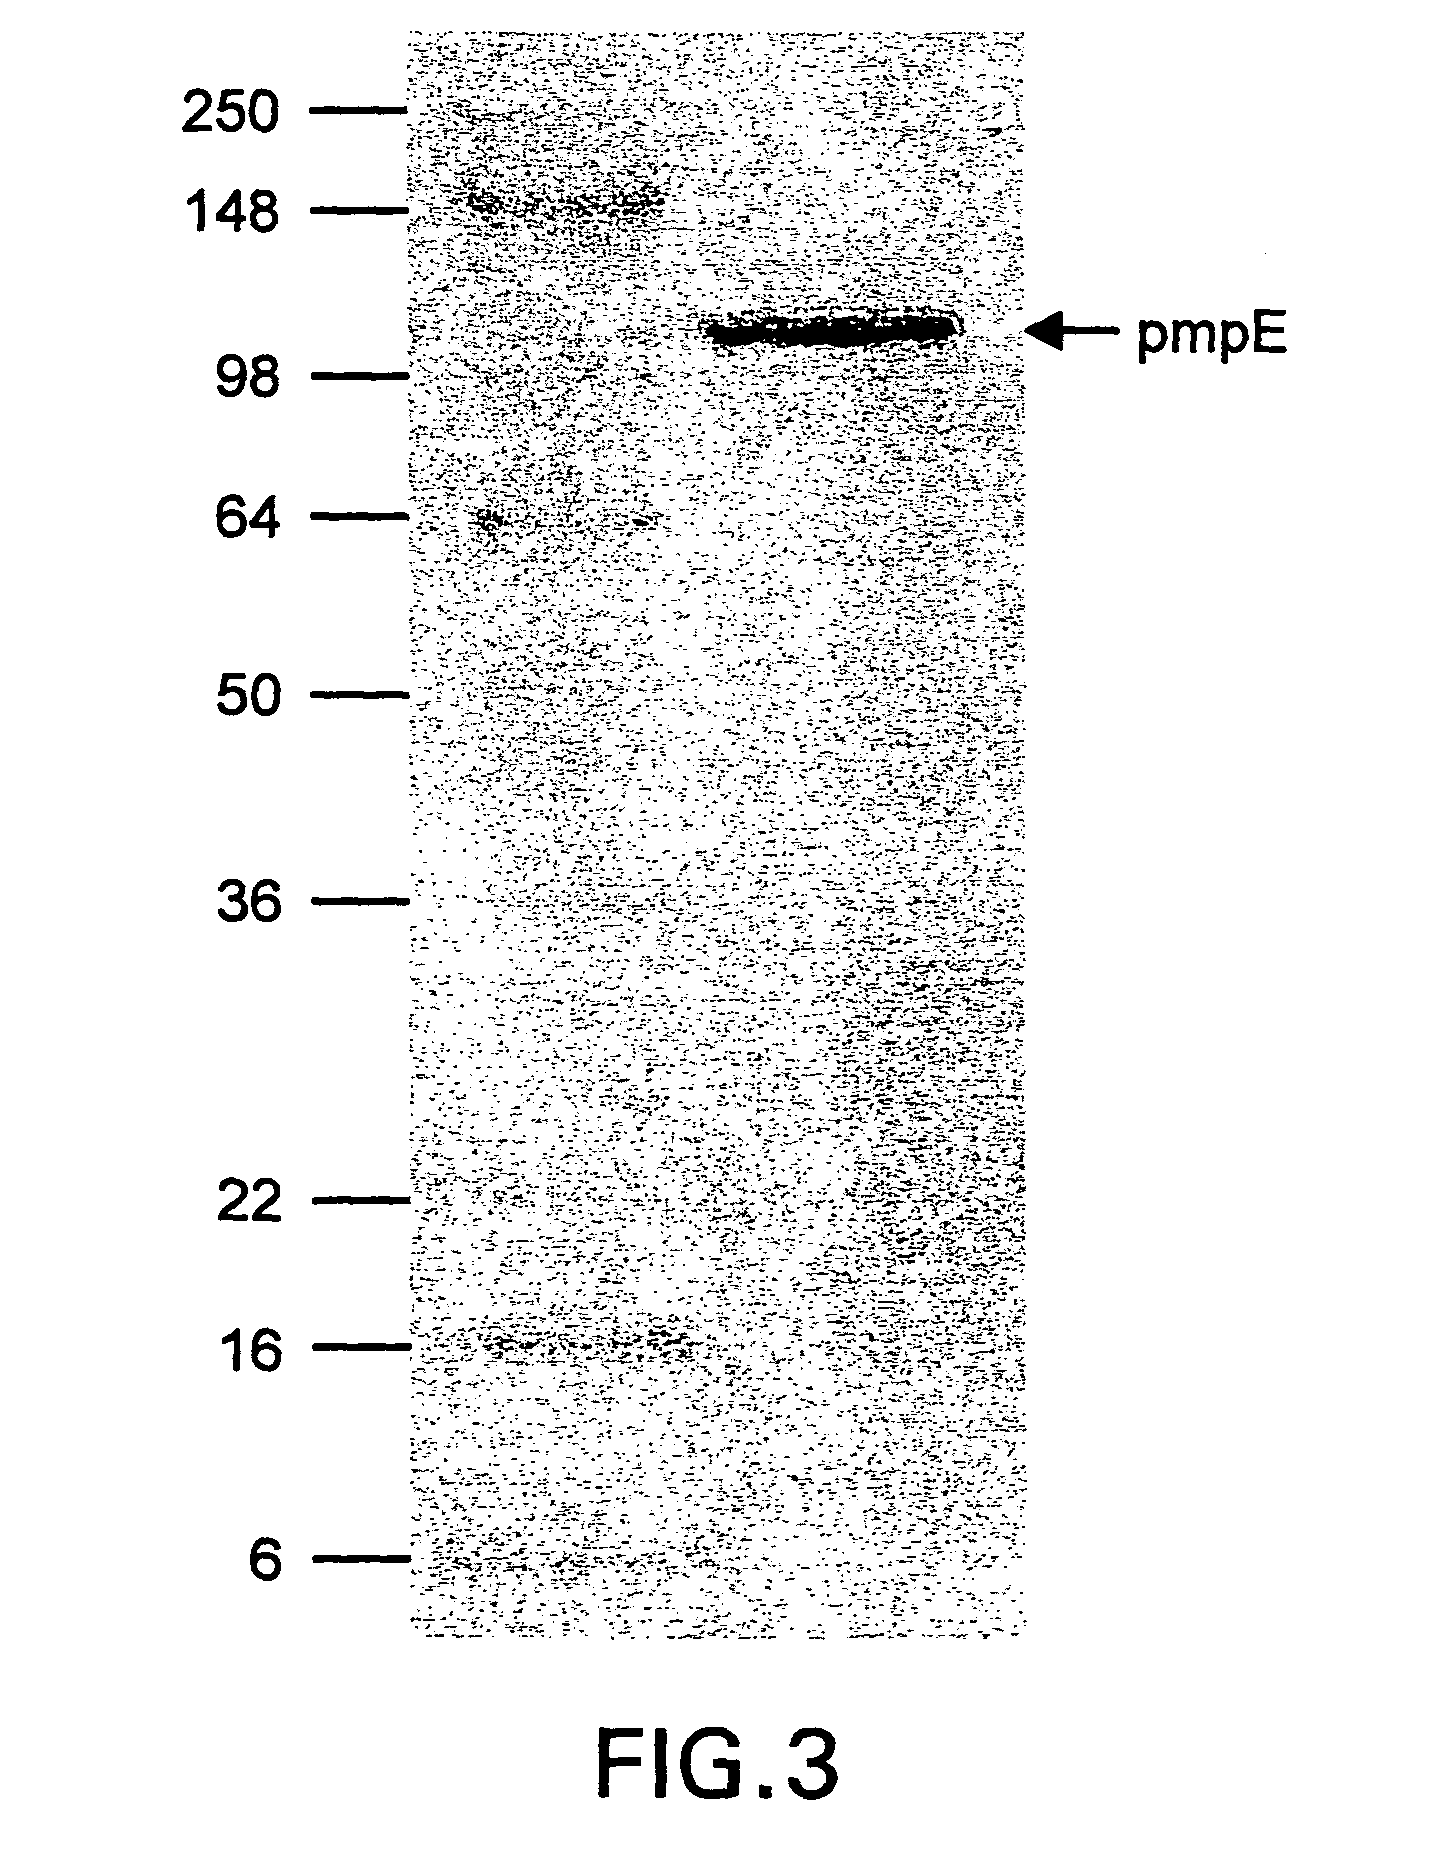 Chlamydia pmp proteins, gene sequences and uses thereof